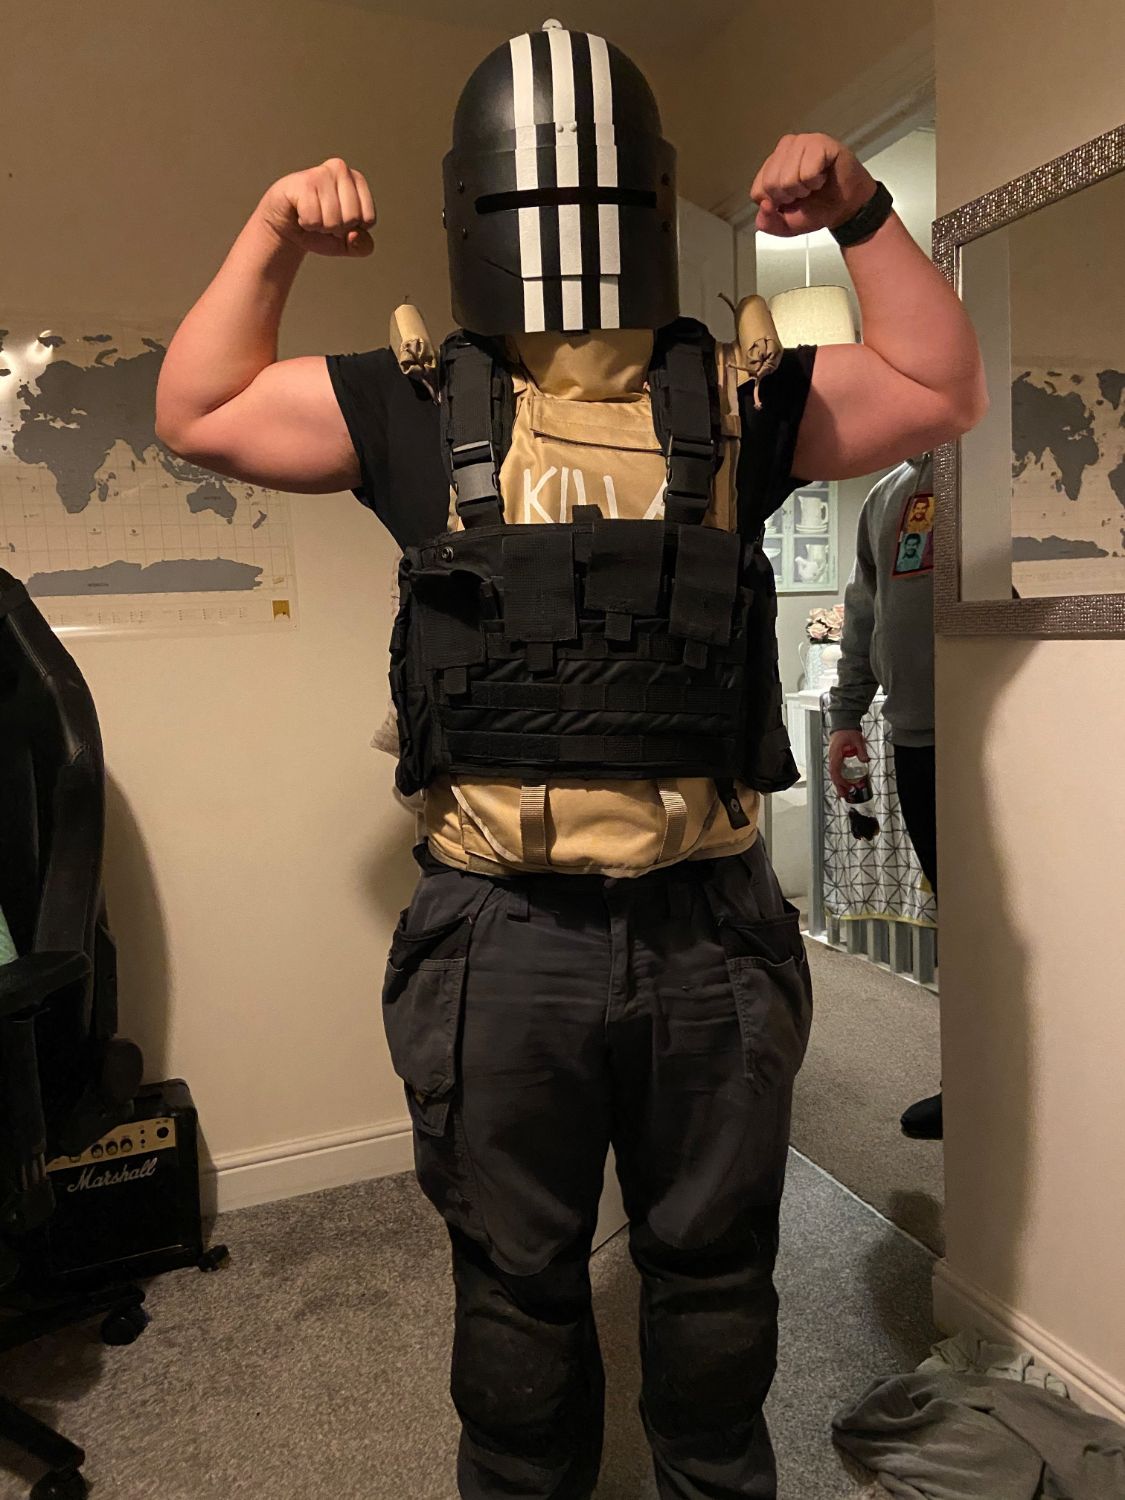 Full killa outfit priced to clear - Gear - Airsoft Forums UK